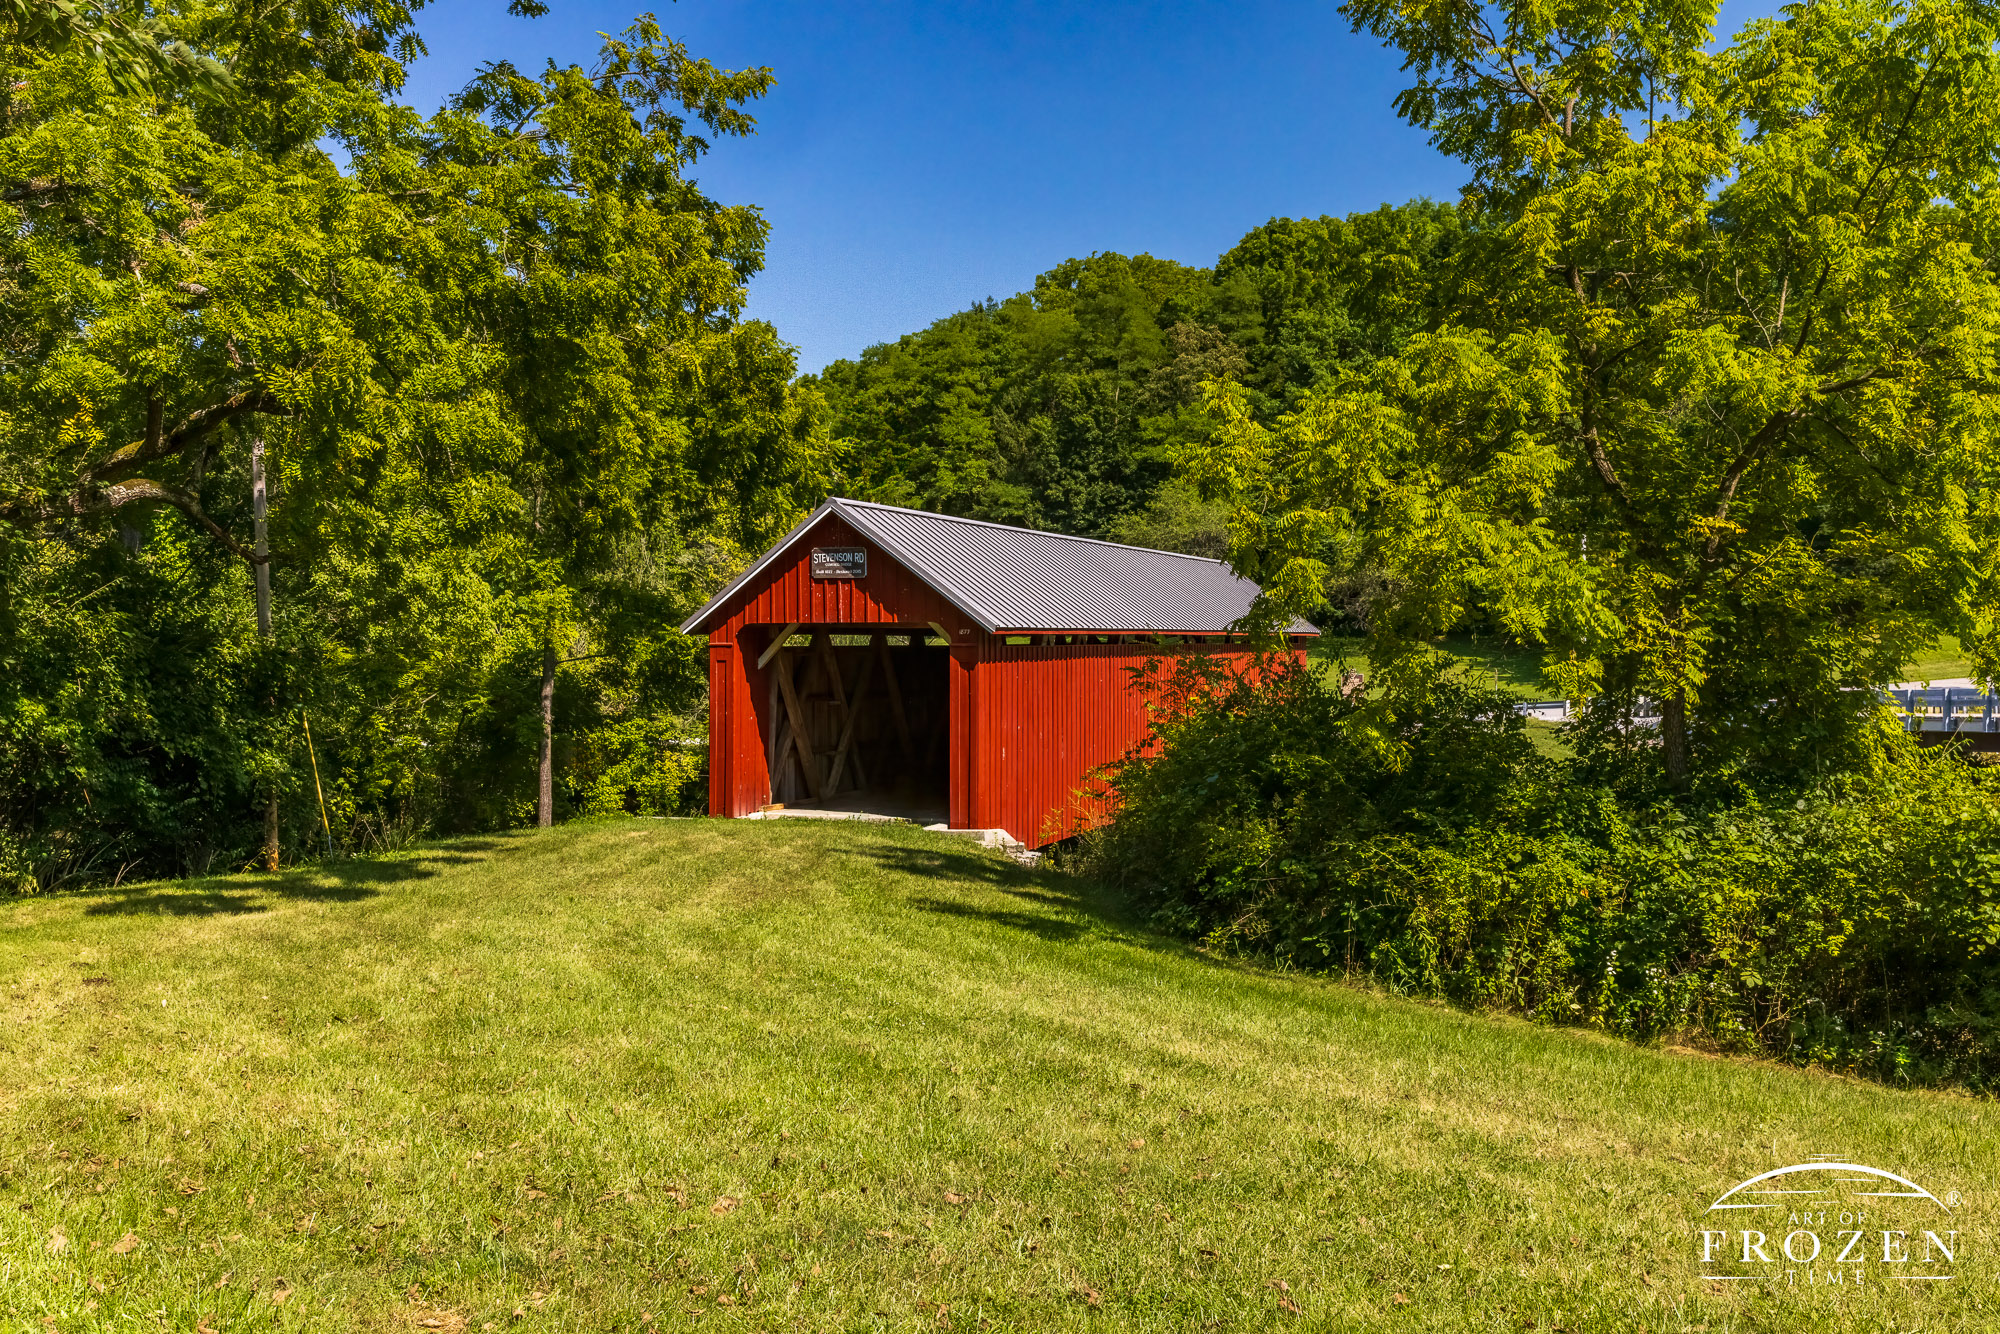 Stevenson Road Covered Bridge northeast of Xenia where the blue skies, green vegetation and bright red pain perfectly contrast on a summer day, capturing another example of an Ohio Covered Bridge